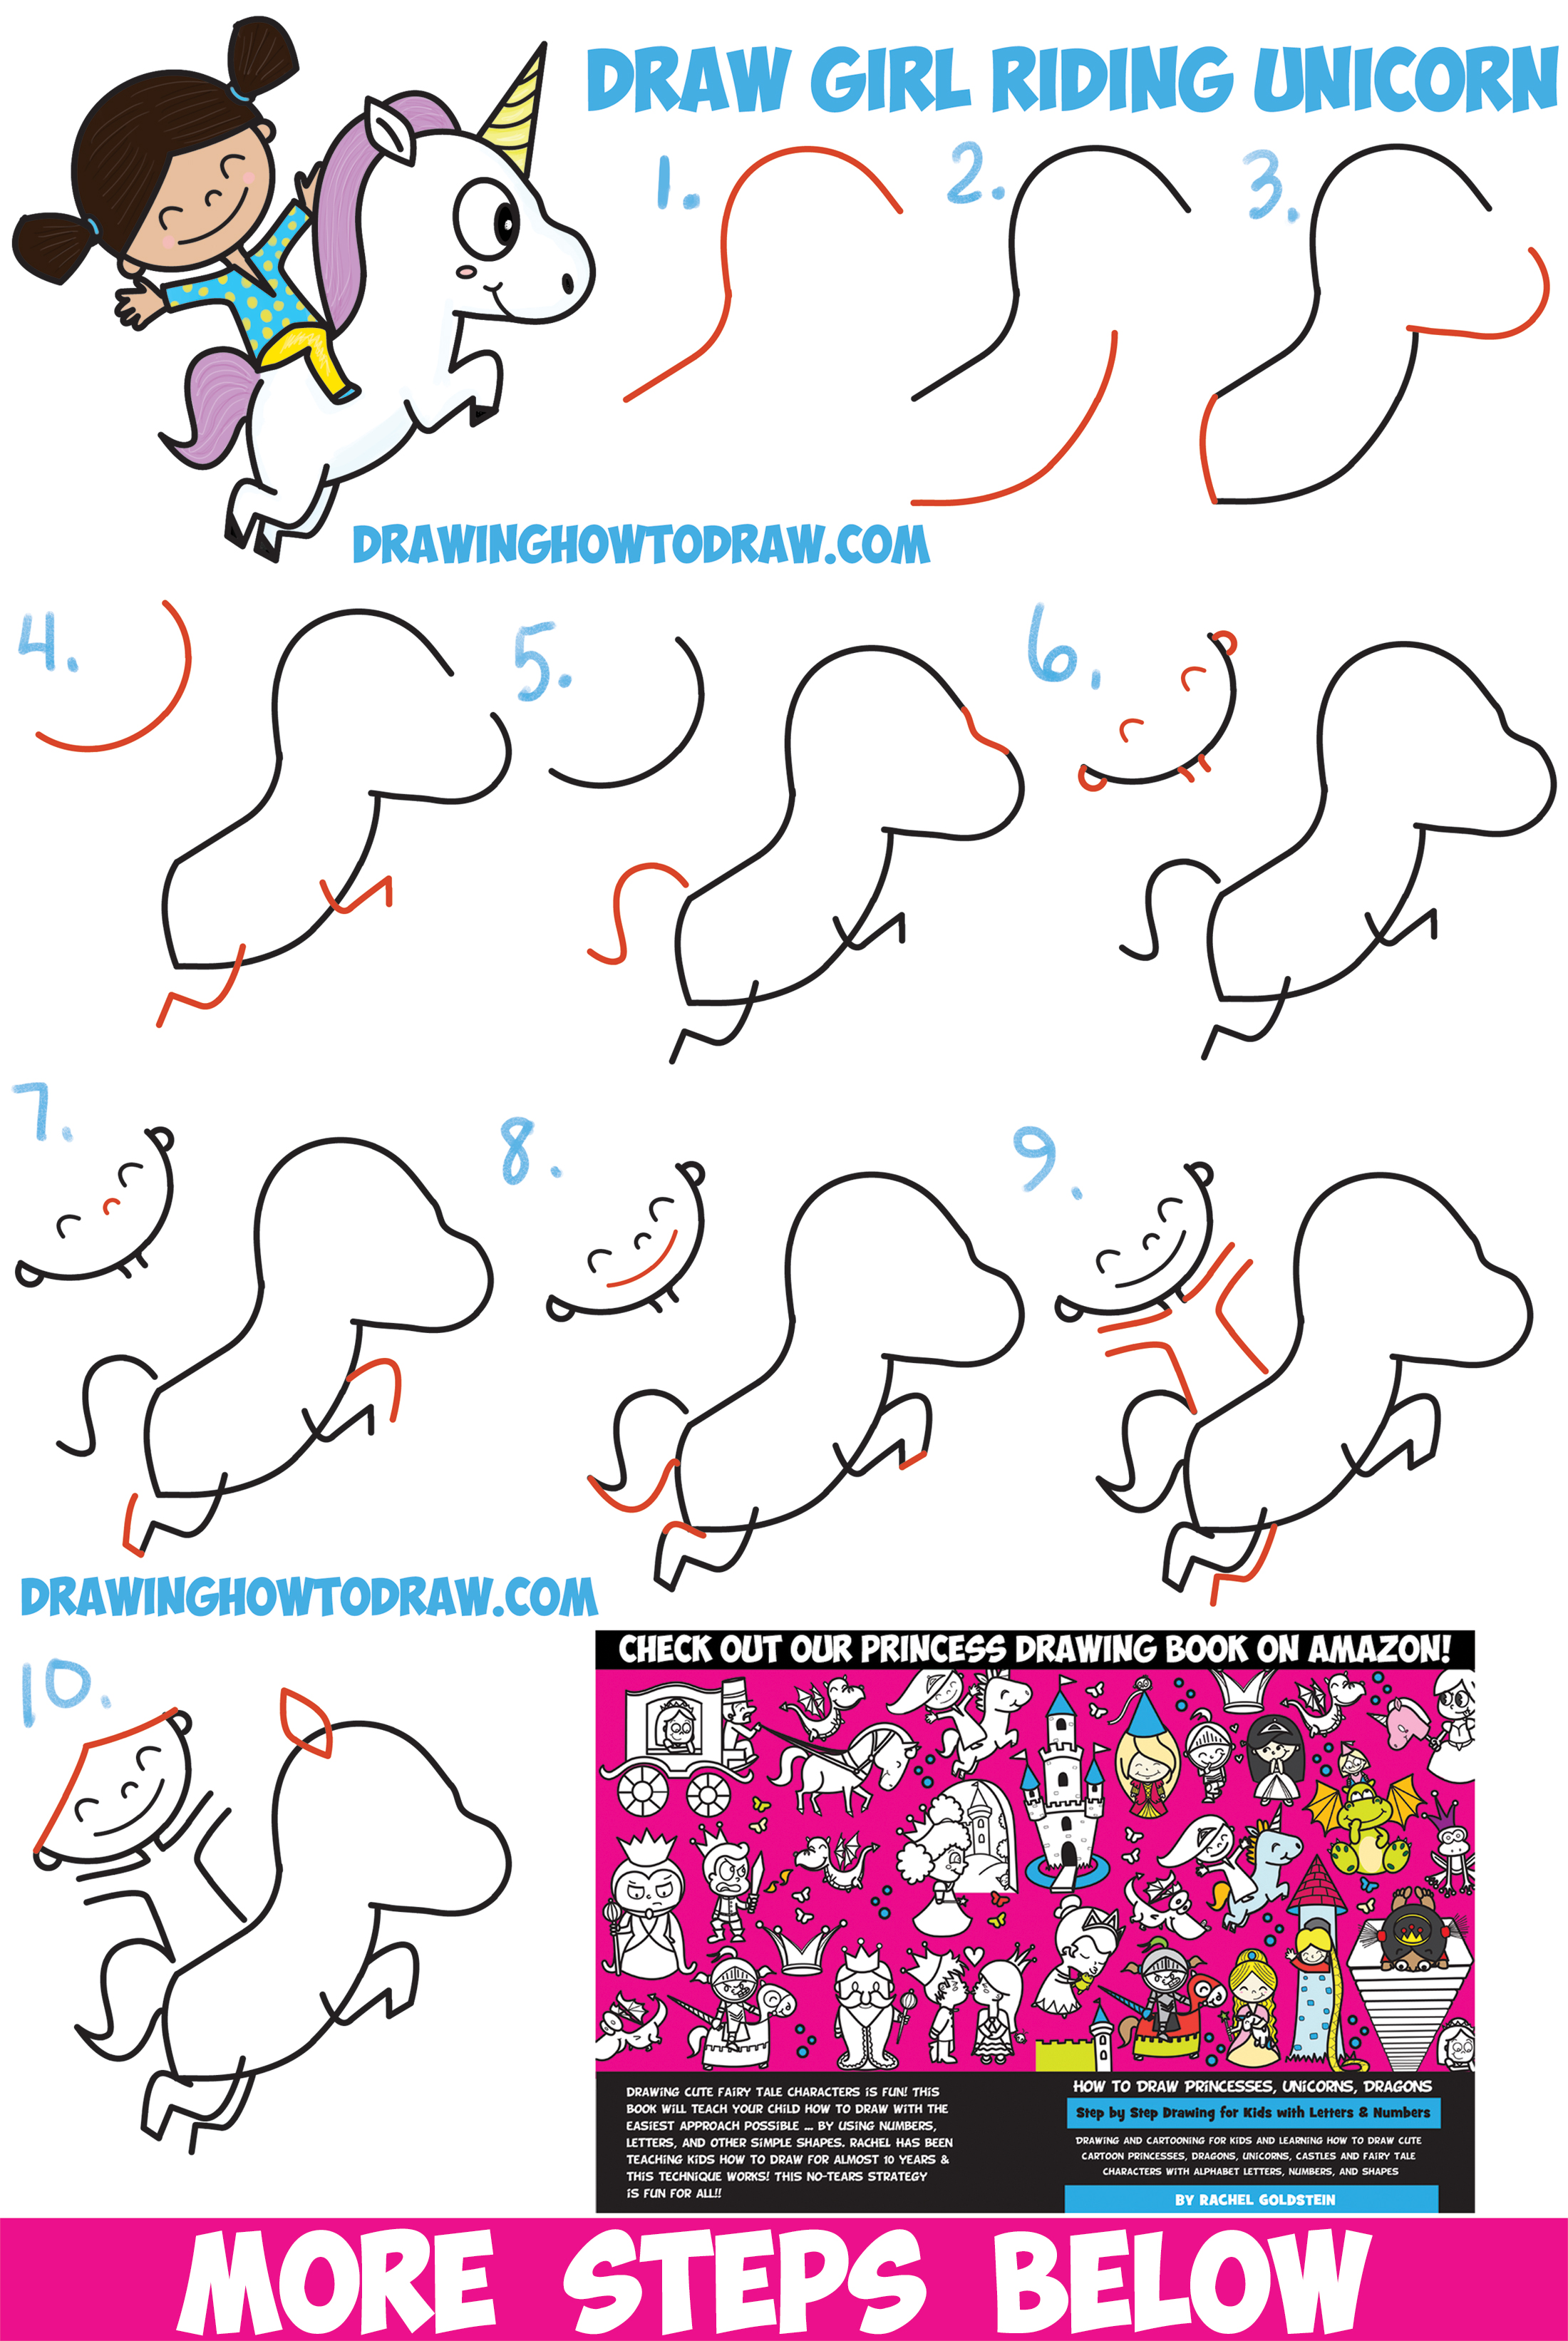 How to Draw a Cute Kawaii / Chibi Girl Riding a Unicorn in Easy Step by